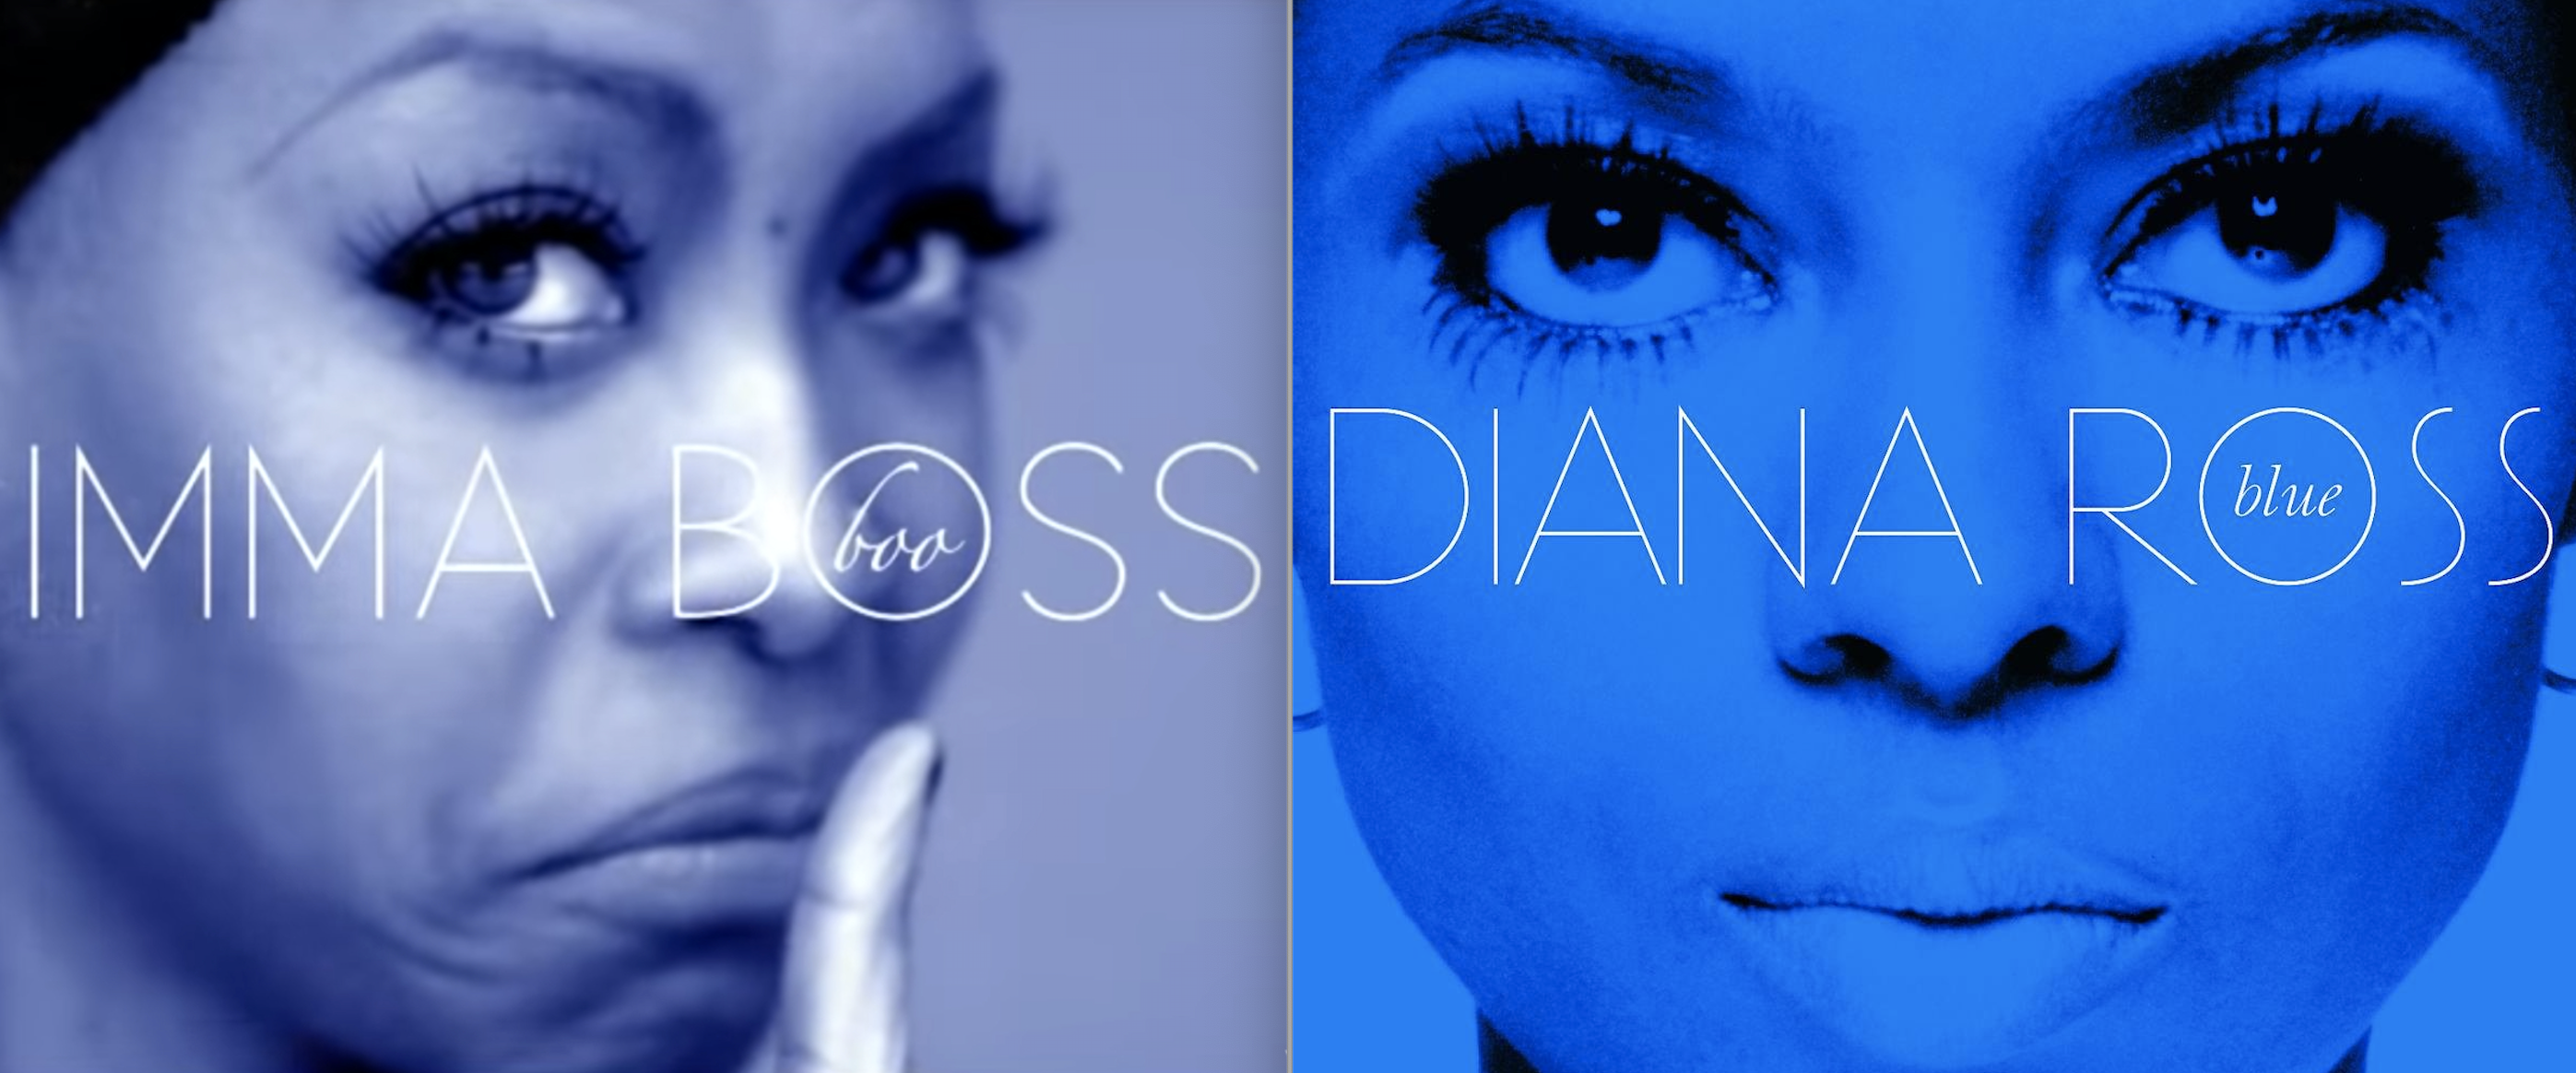 Erykah Badu&#x27;s homage to Diana Ross&#x27;s &quot;Blue,&quot; entitled &quot;Imma Boss Boo&quot;